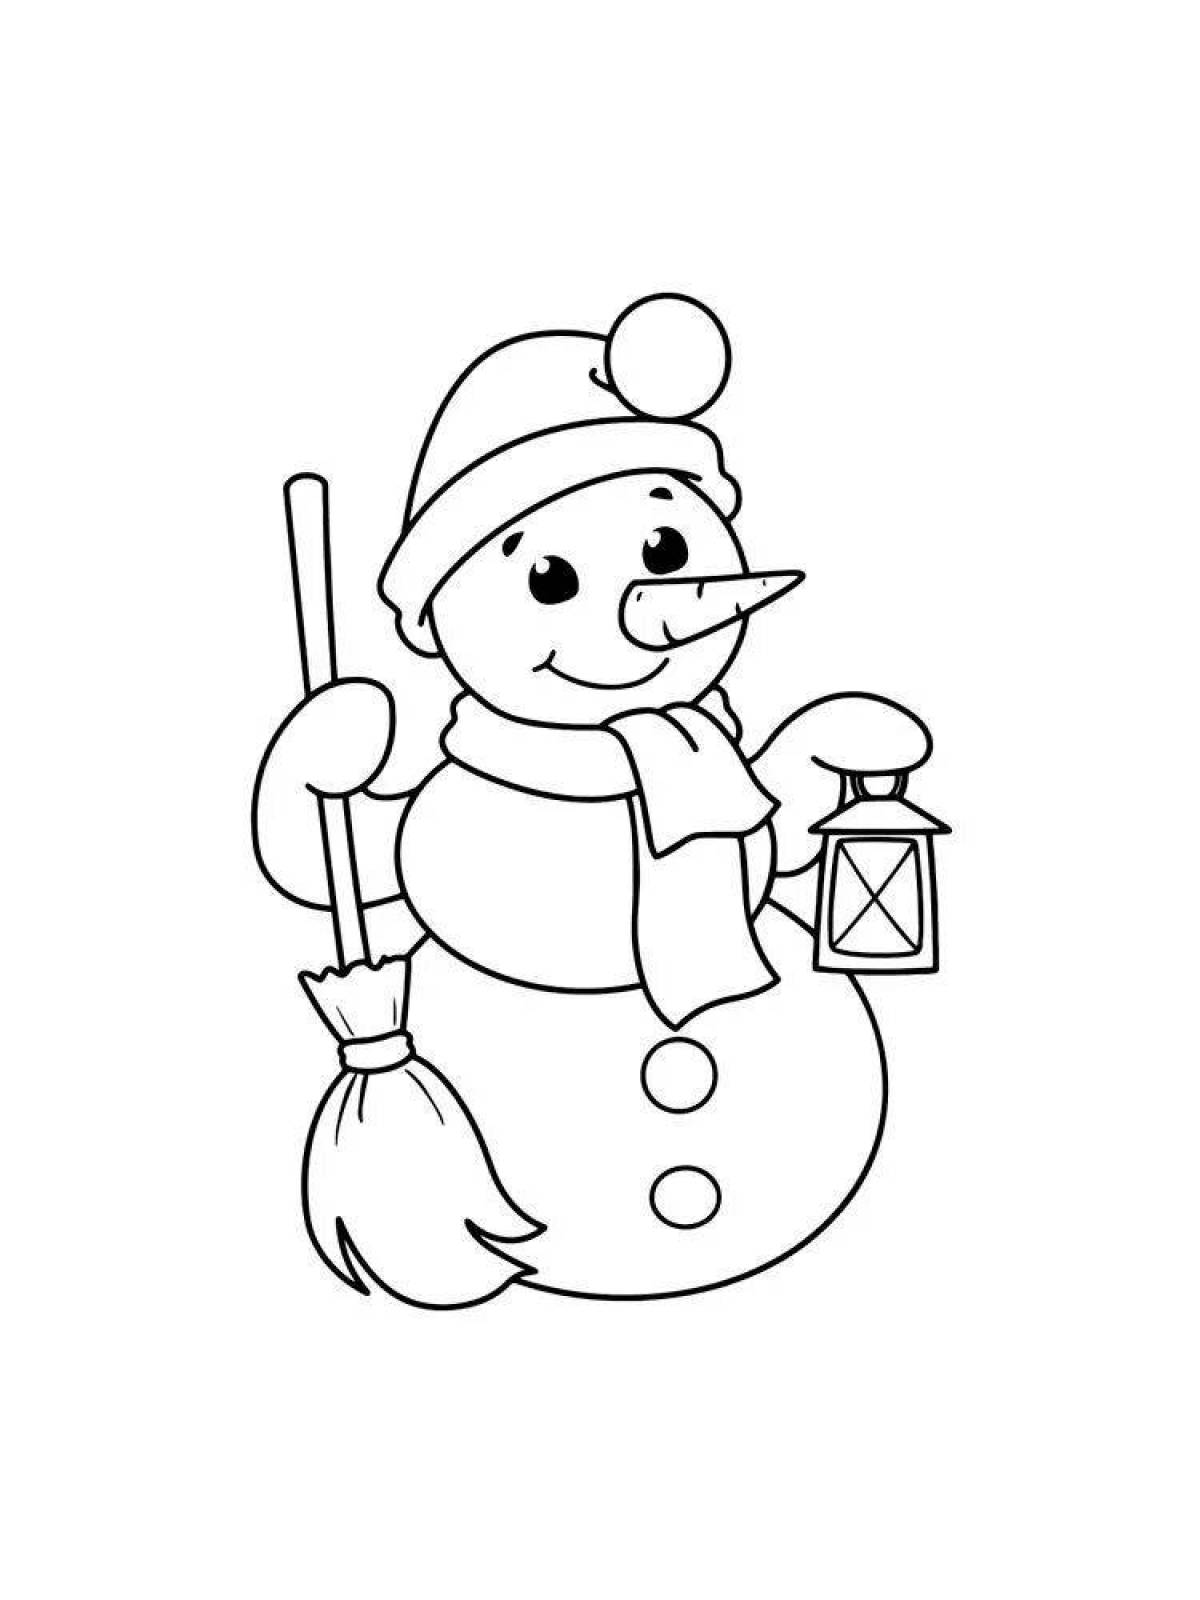 Adorable snowman coloring book for kids 2-3 years old